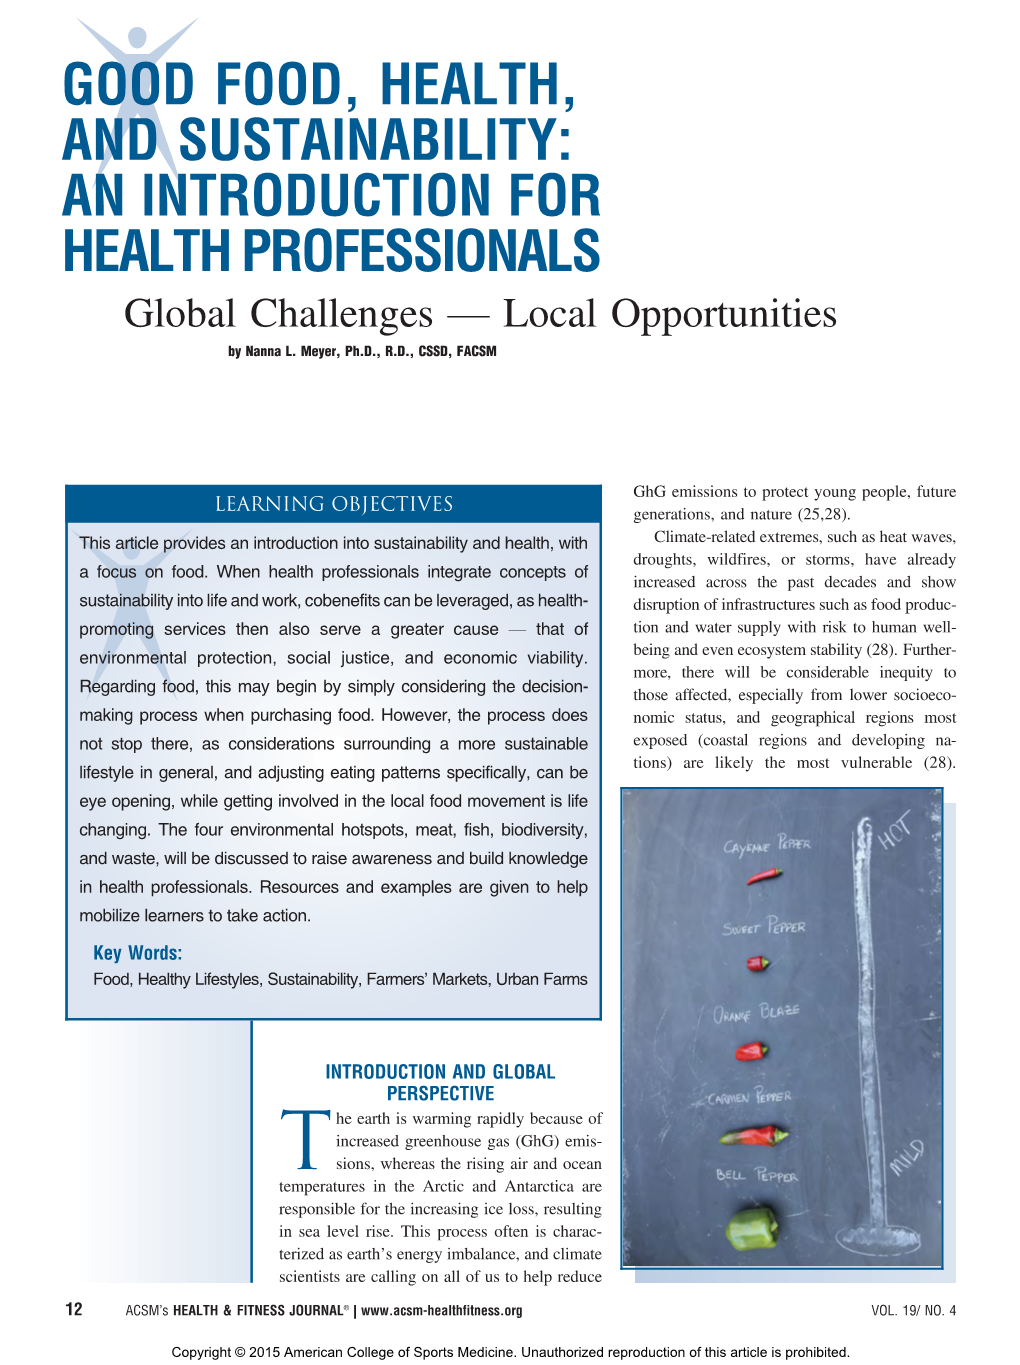 GOOD FOOD, HEALTH, and SUSTAINABILITY: an INTRODUCTION for HEALTH PROFESSIONALS Global Challenges V Local Opportunities by Nanna L